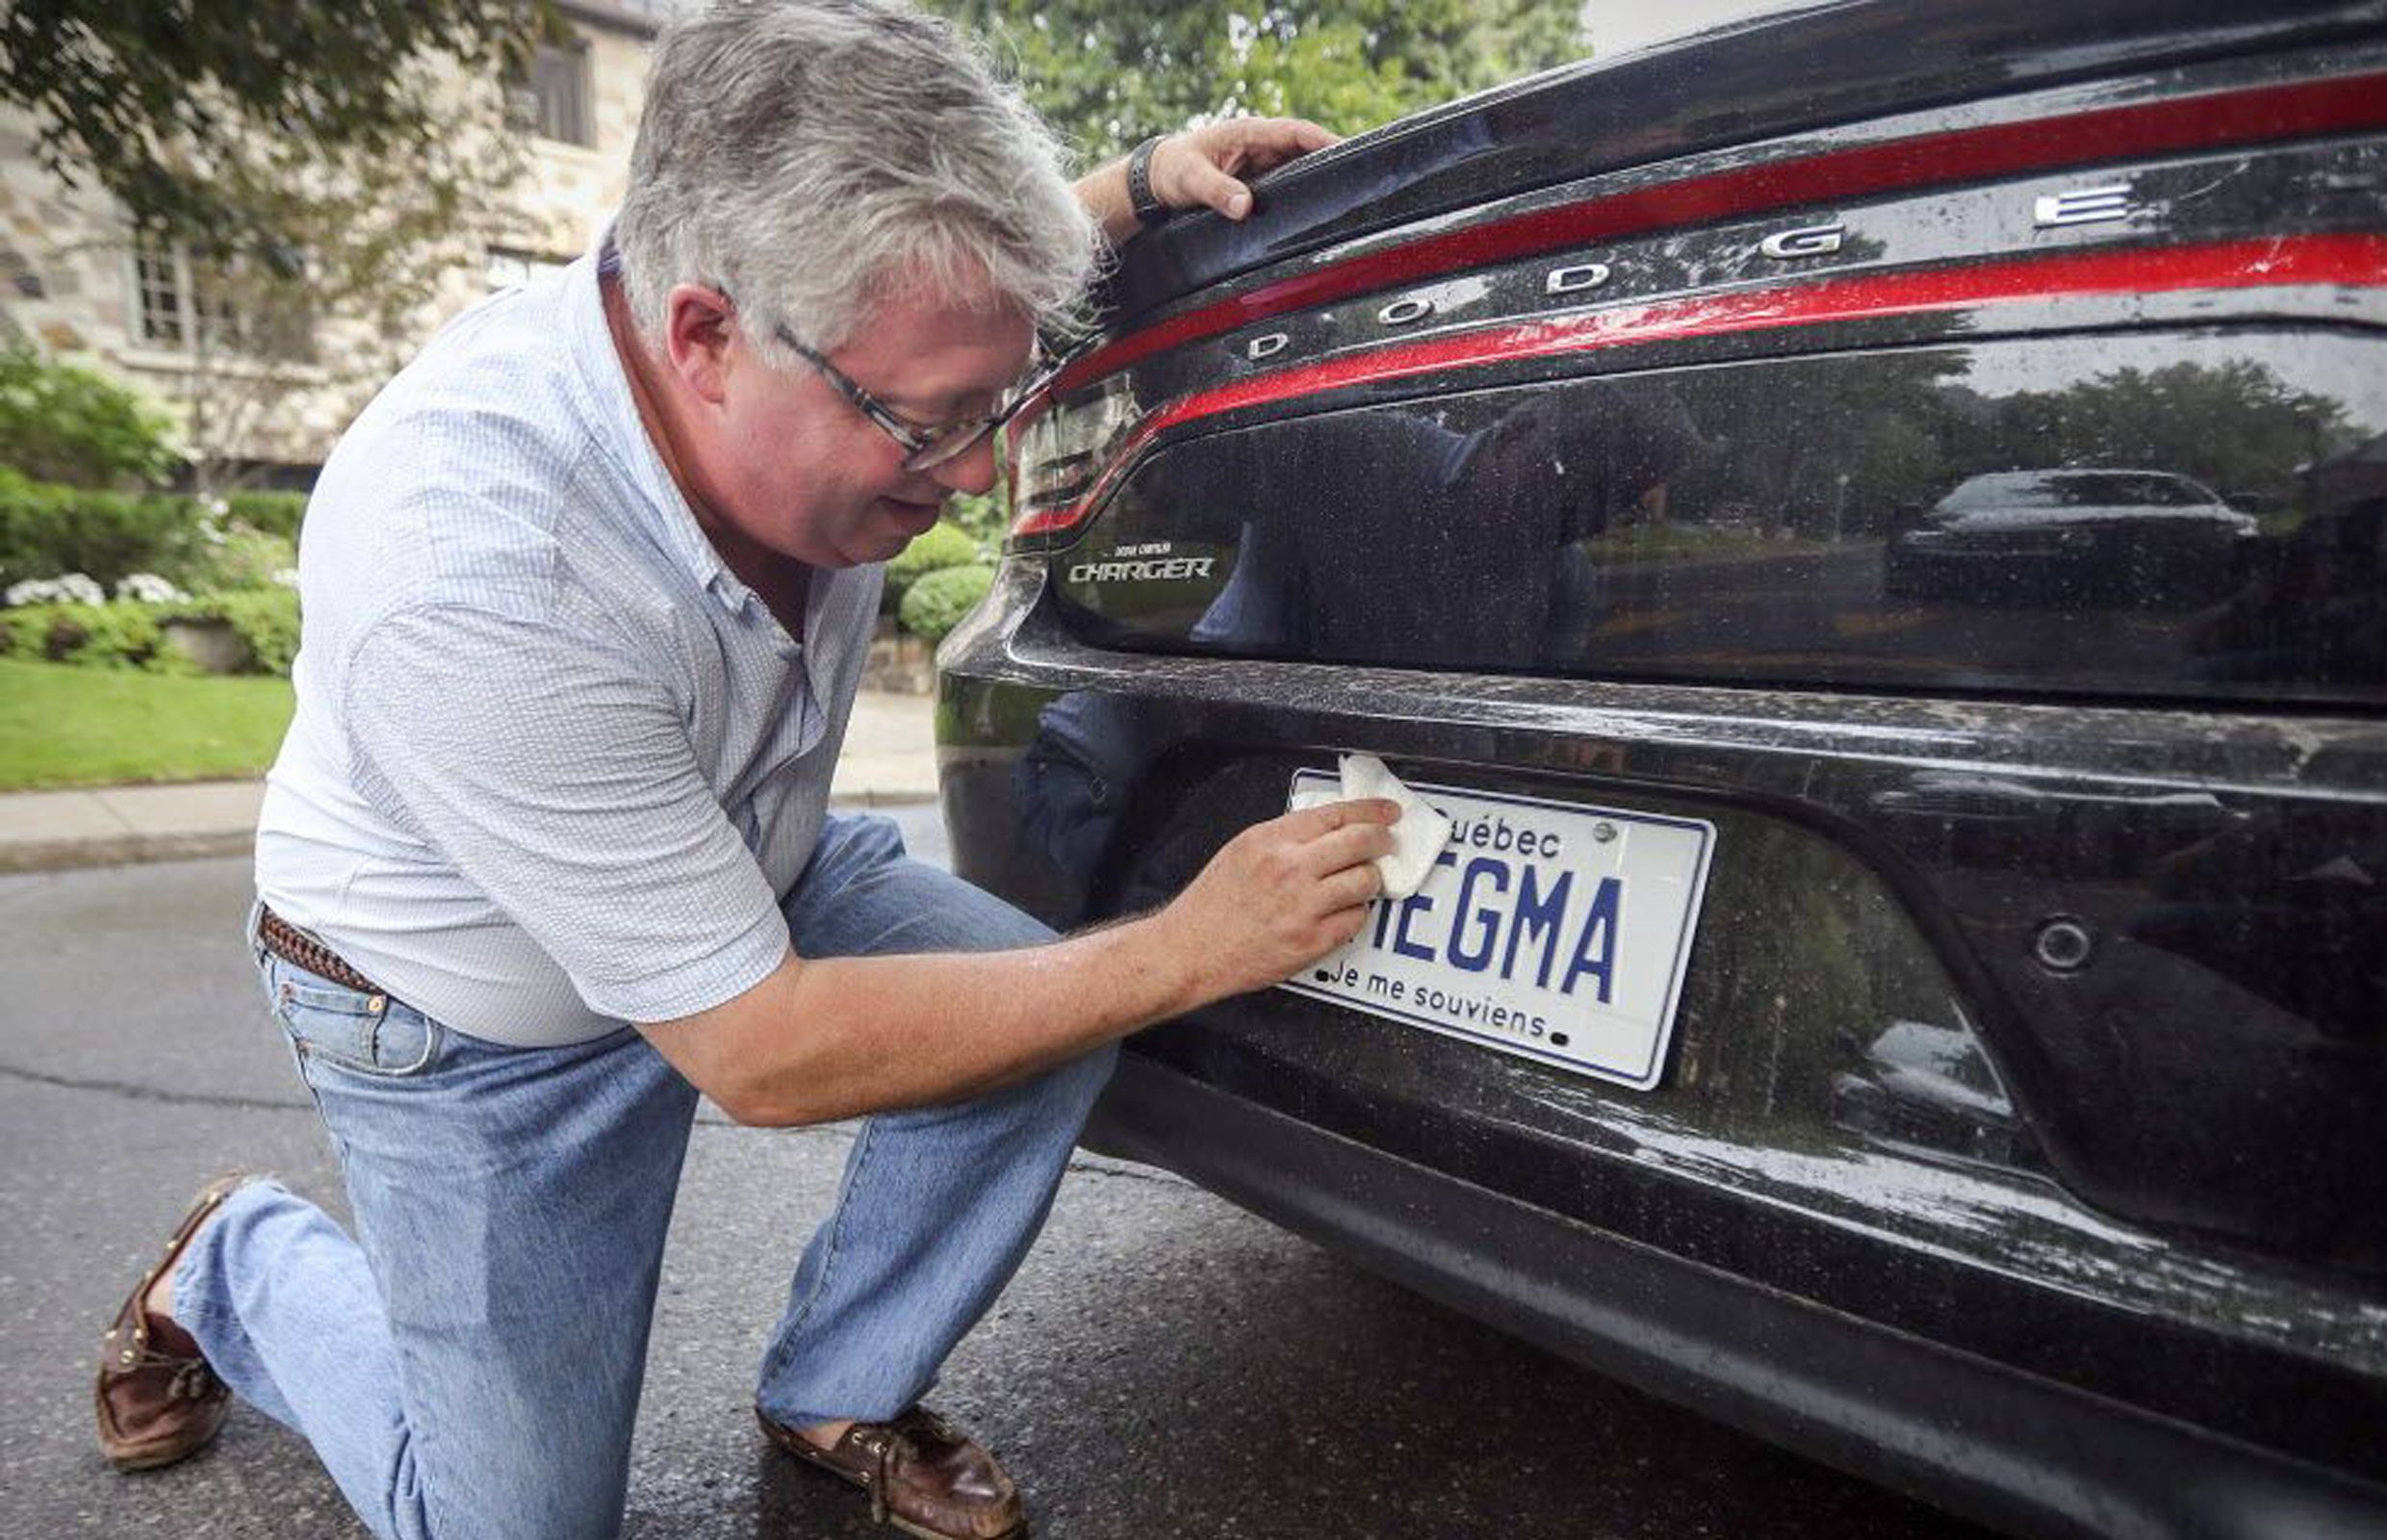 New York's new license plates finally hit the road